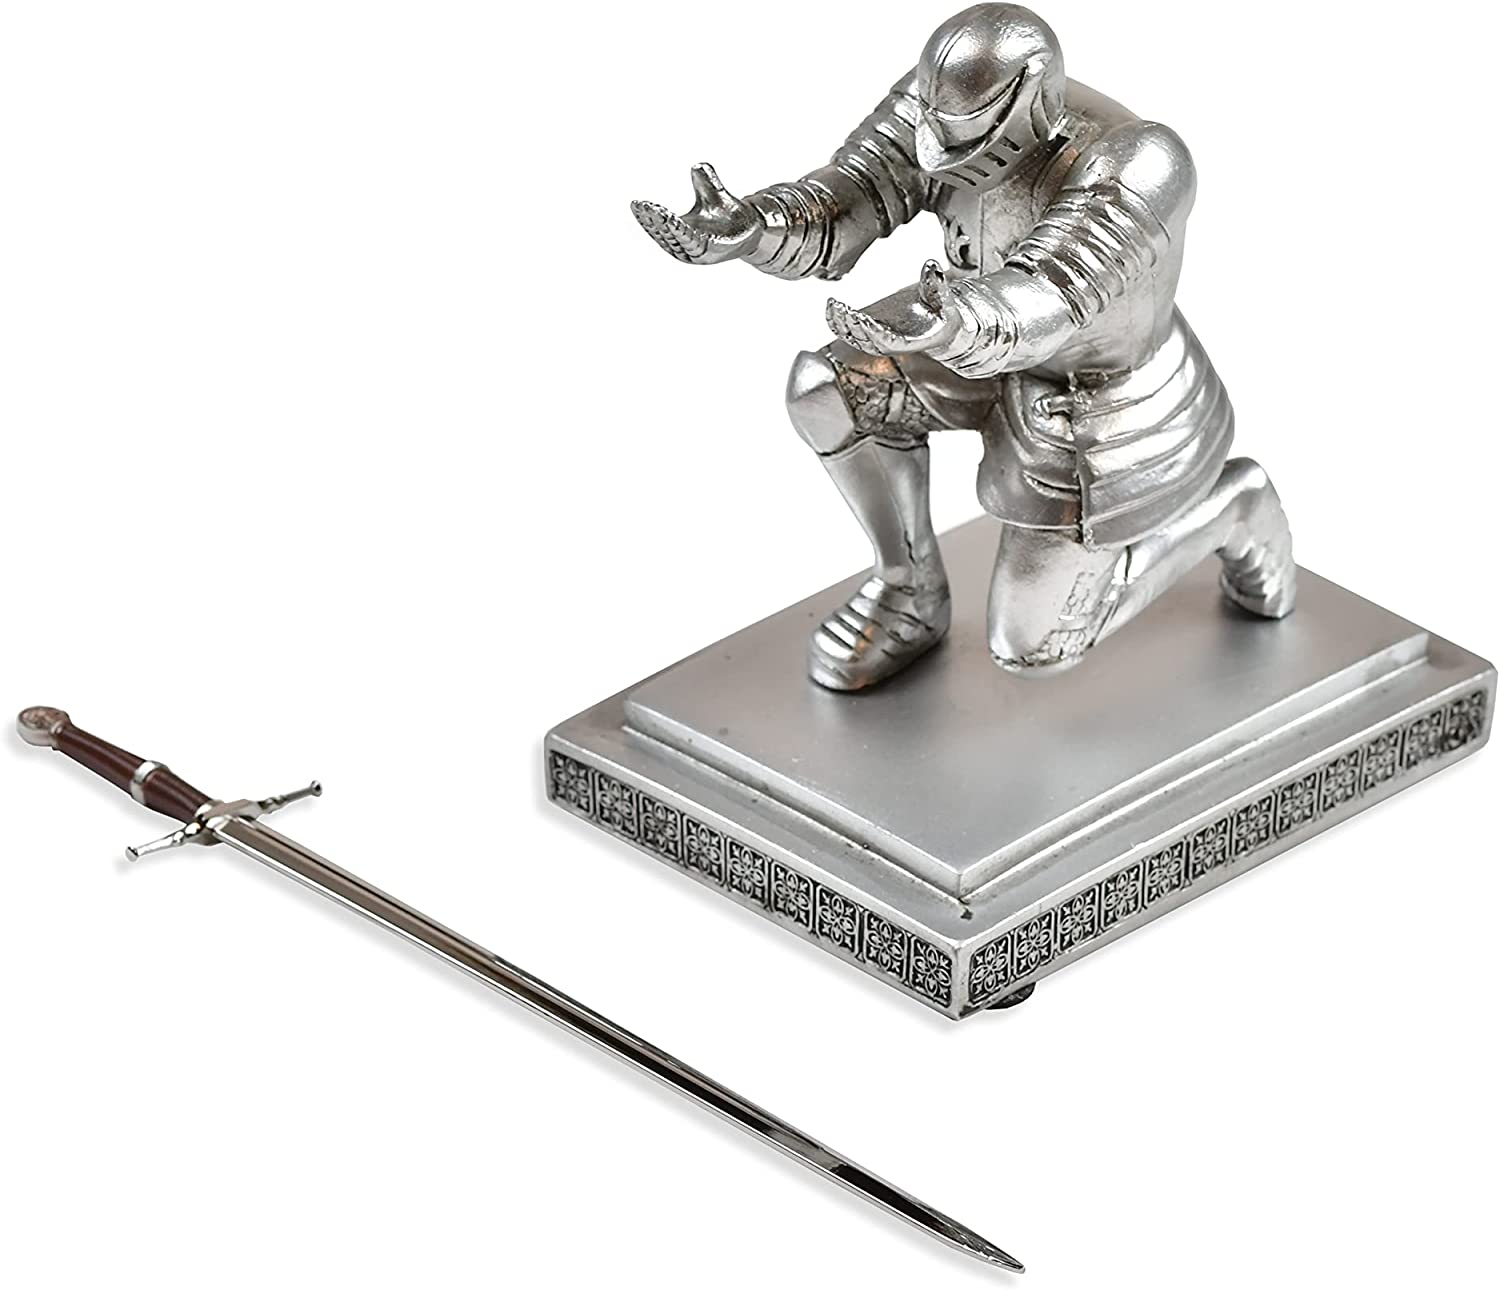 The Witcher - Geralt von Rivia's steel sword as a letter opener with a knight's stand